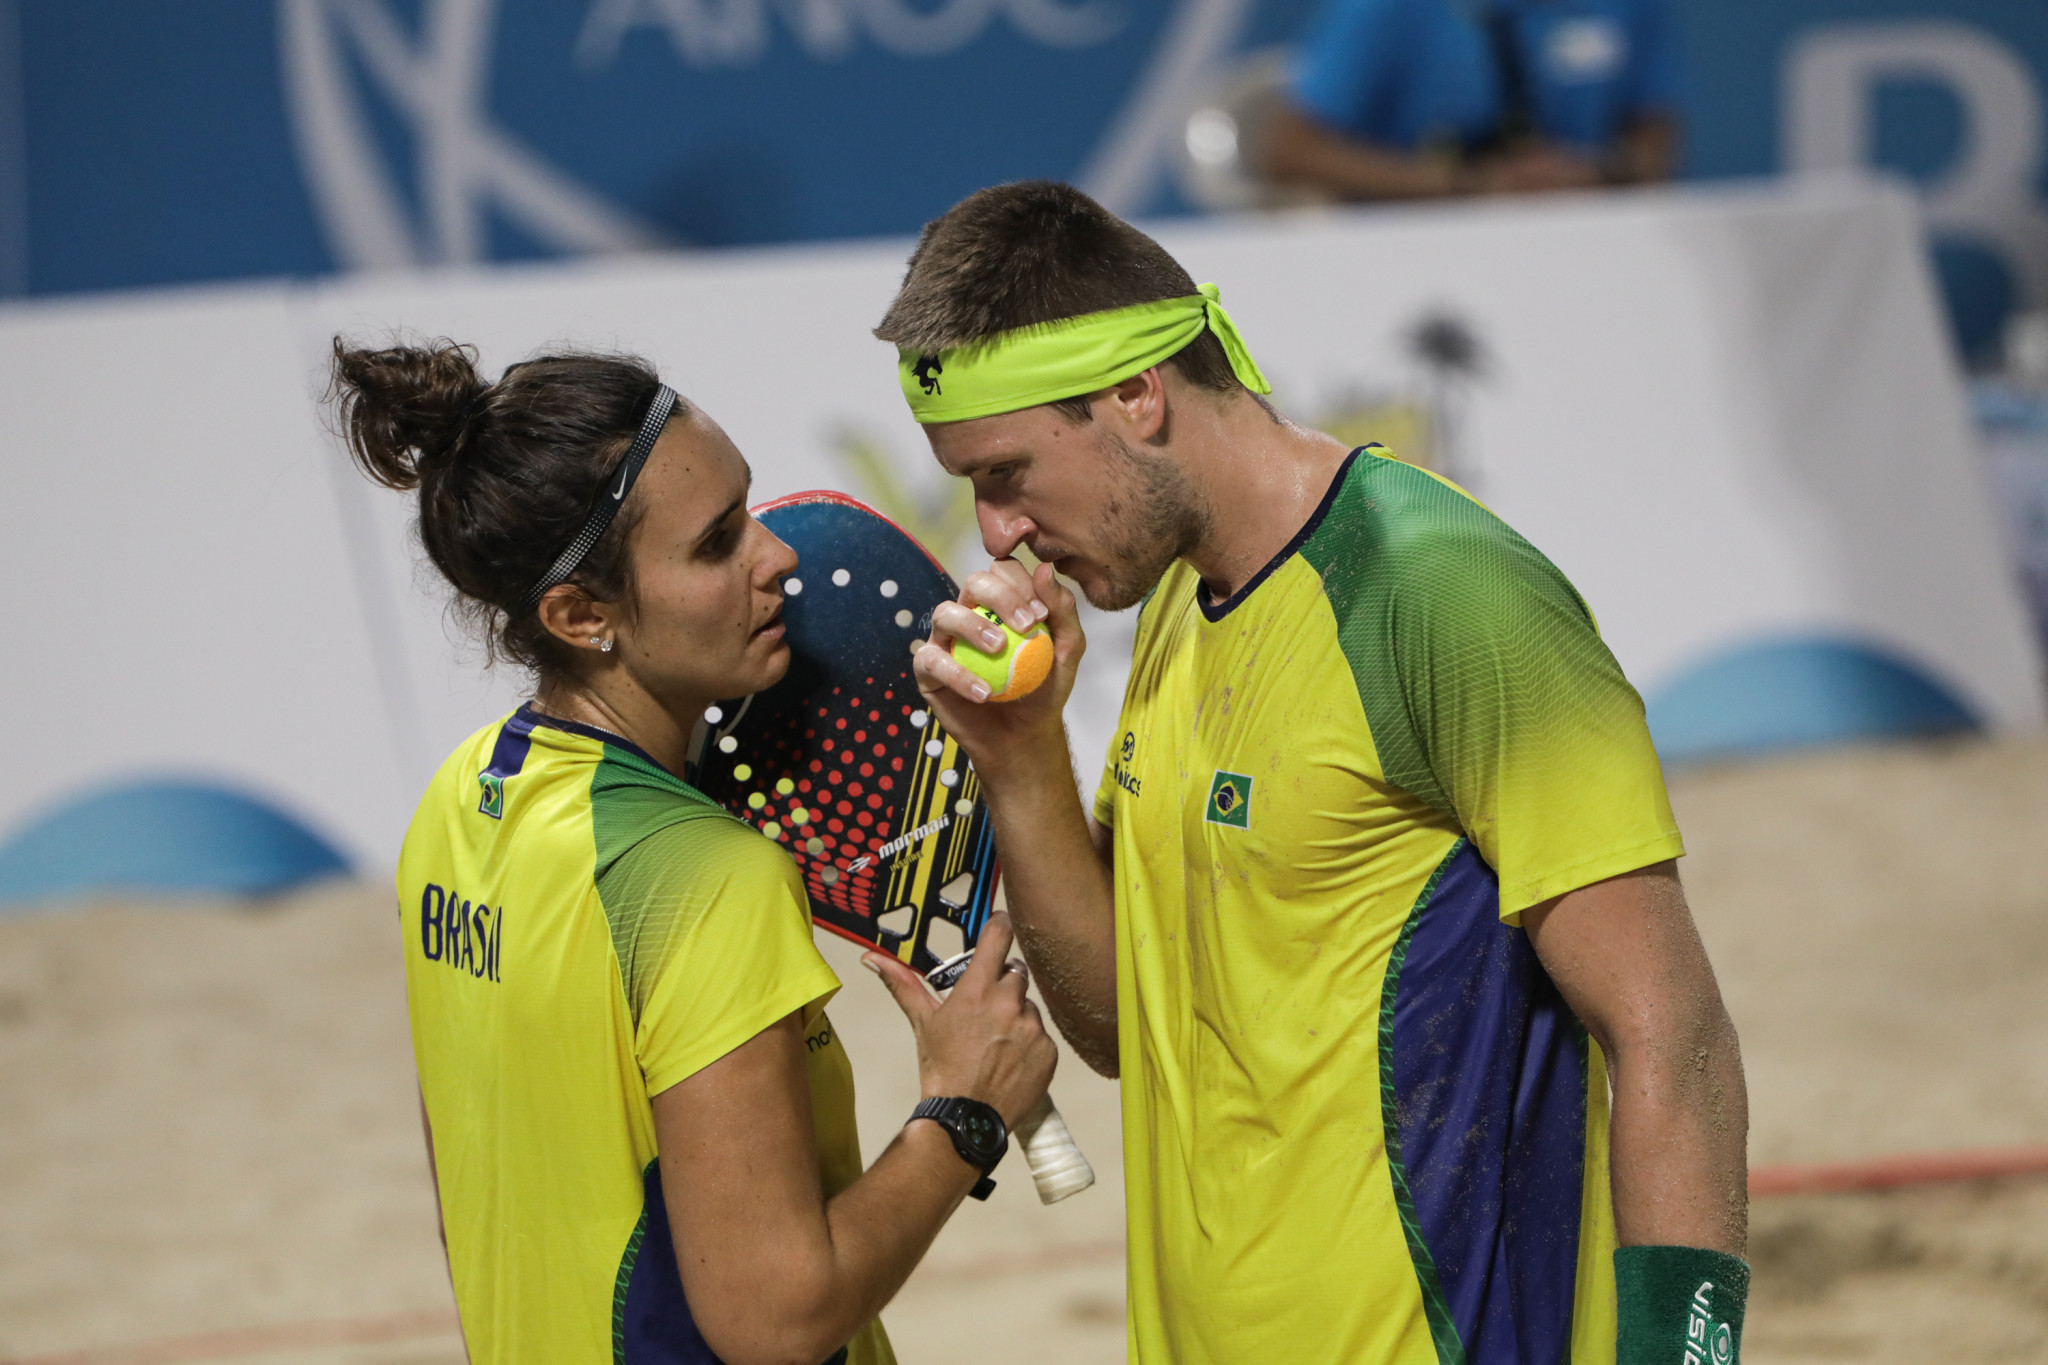 Andre Baran and Rafaella Miller won the mixed doubles beach tennis for Brazil ©ANOC